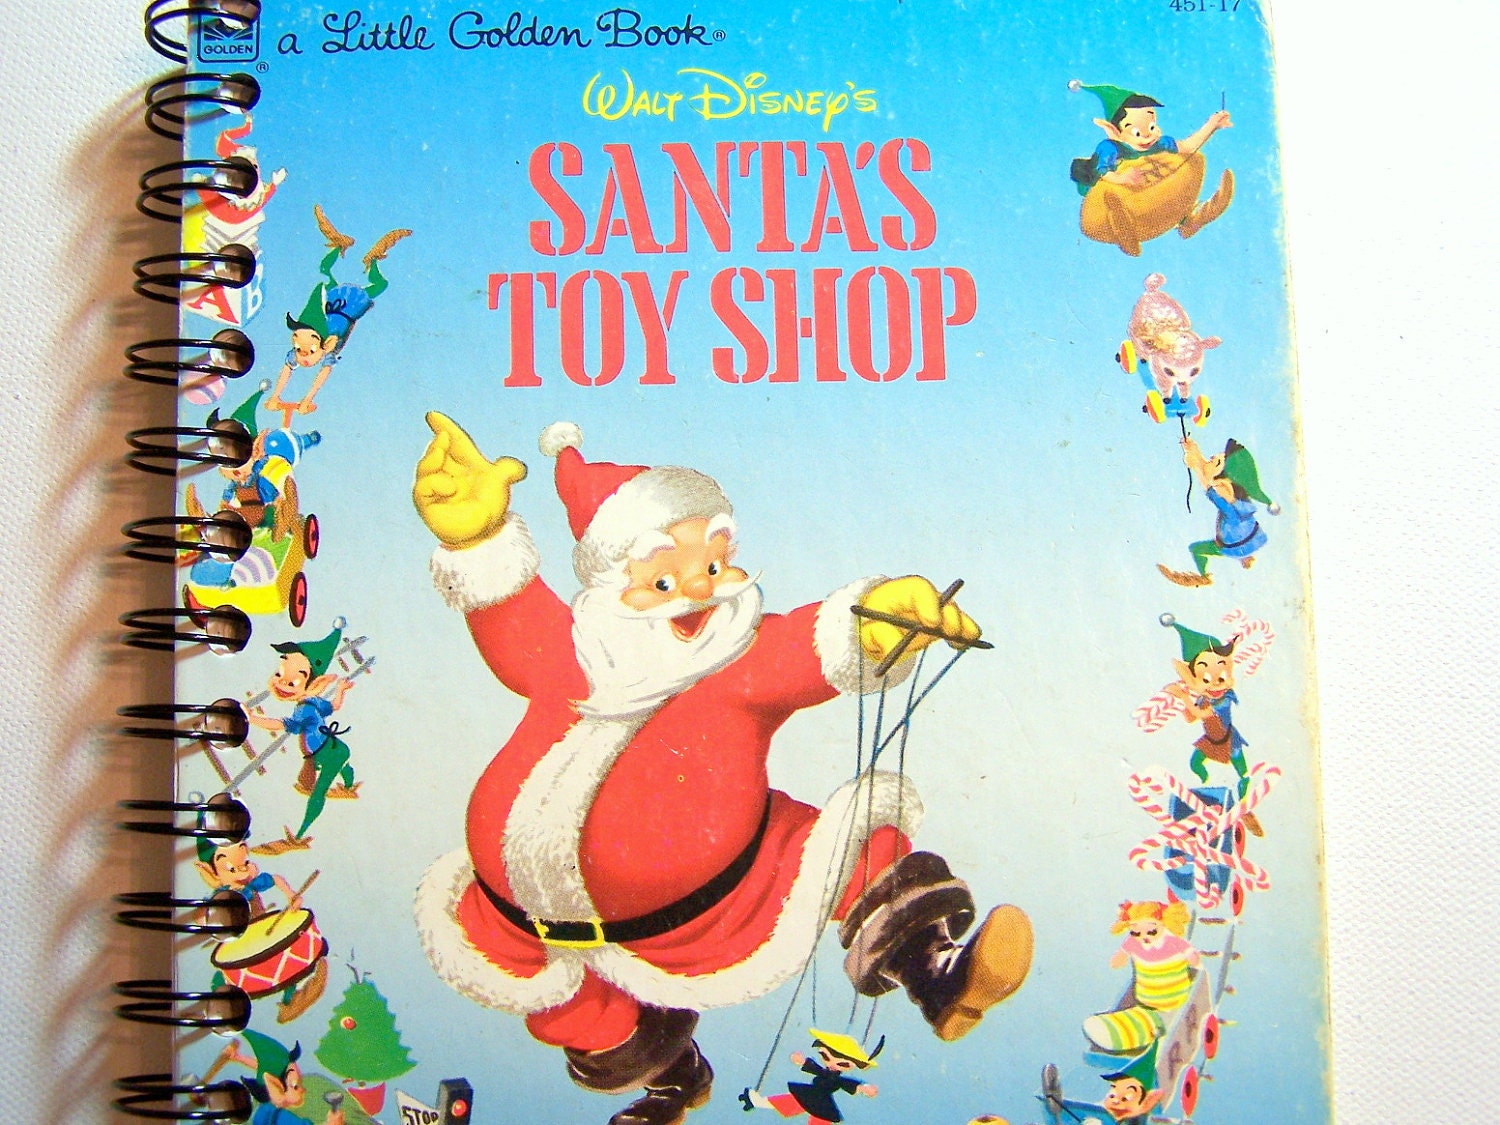 Upcycled Little Golden Book Notebook Upcycled Walt Disney's Book Notebook:  Walt Disney's  Santa's Toy Shop Storybook